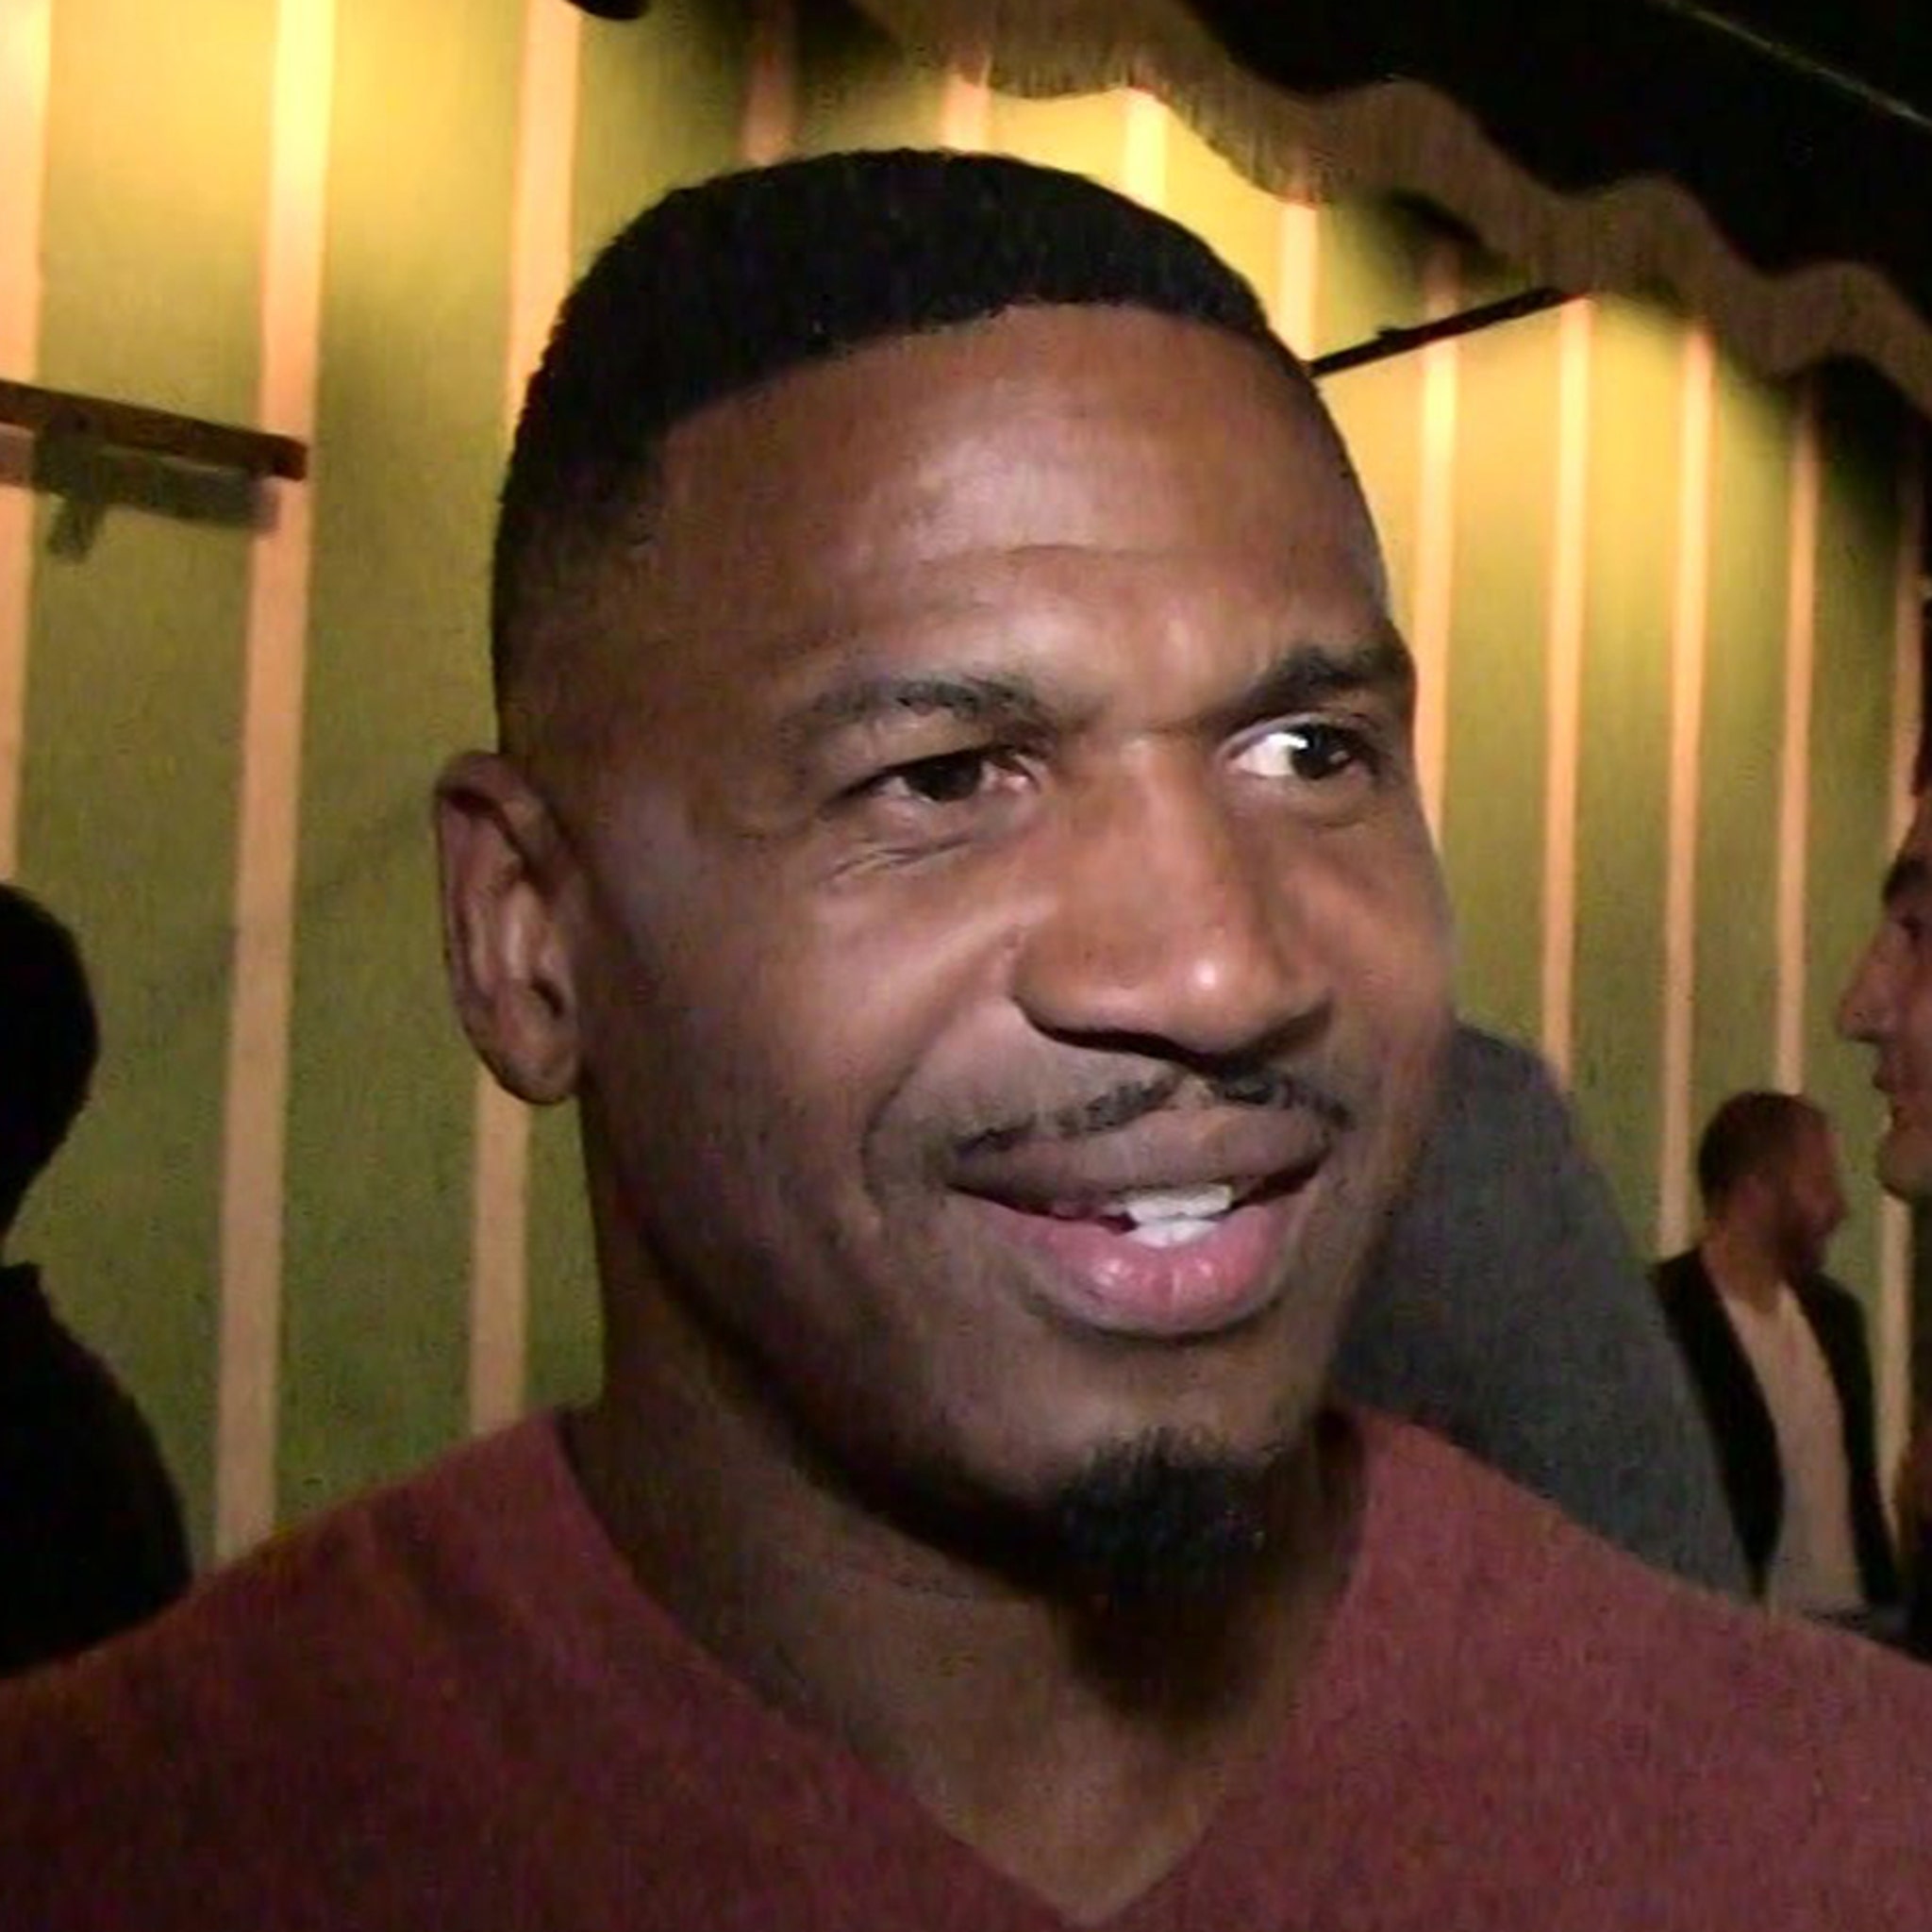 Stevie J Appears to Be Receiving Oral Sex During FaceTime Interview picture